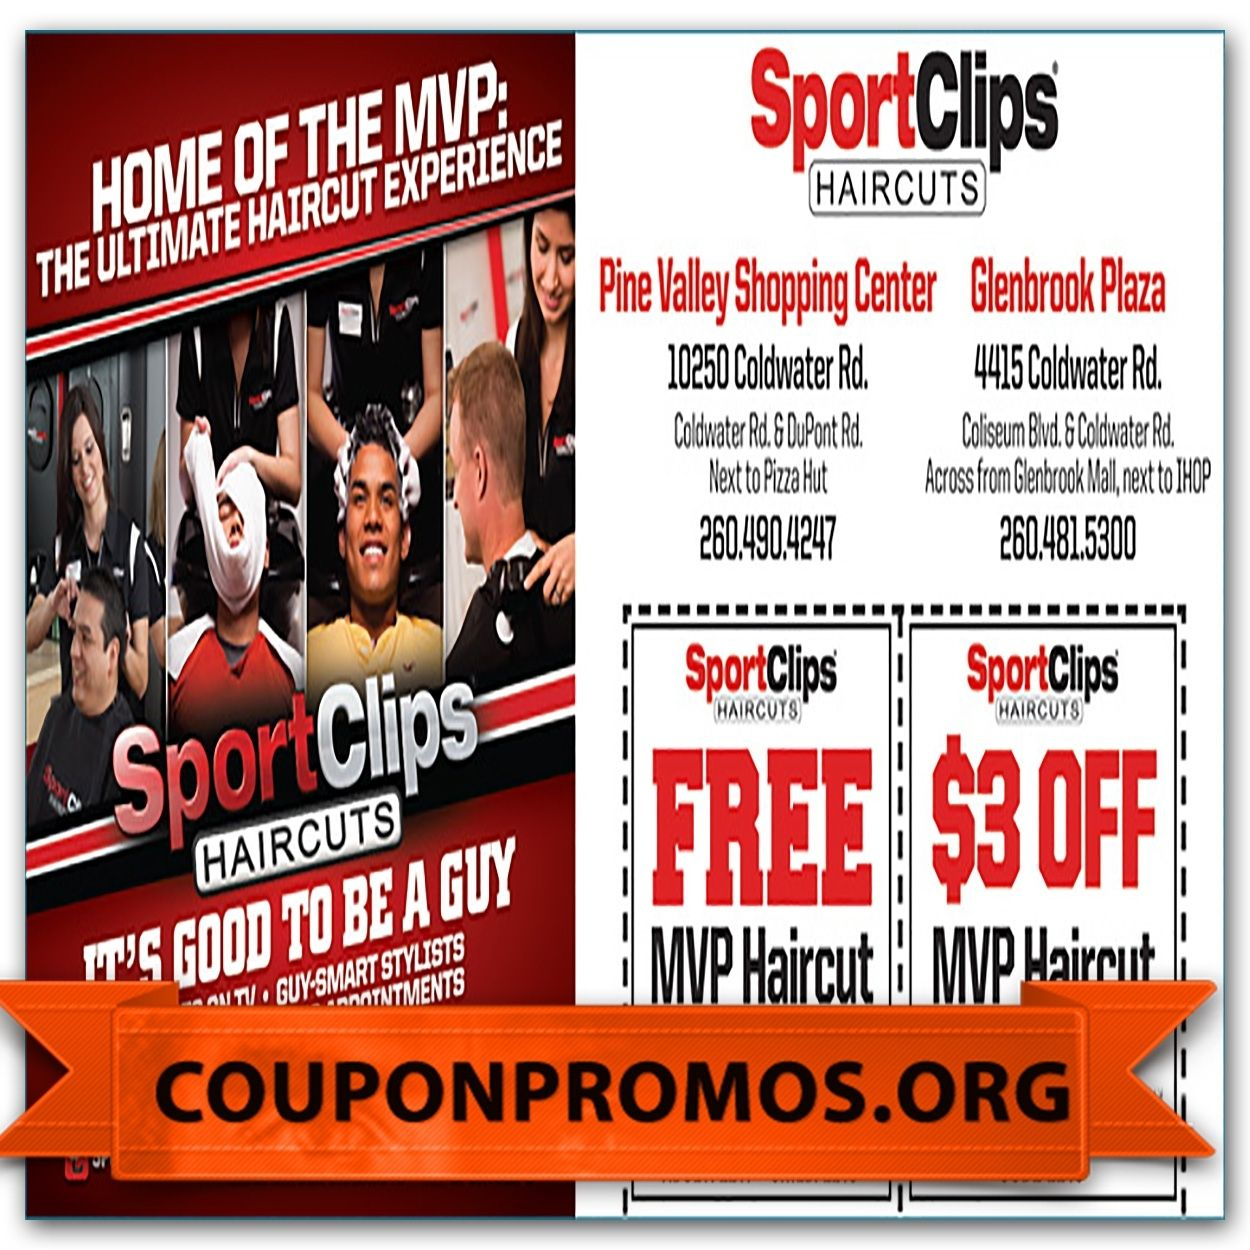 Sports Clips Haircut Coupons Sport Clips Printable Coupons - Sports Clips Free Haircut Printable Coupon